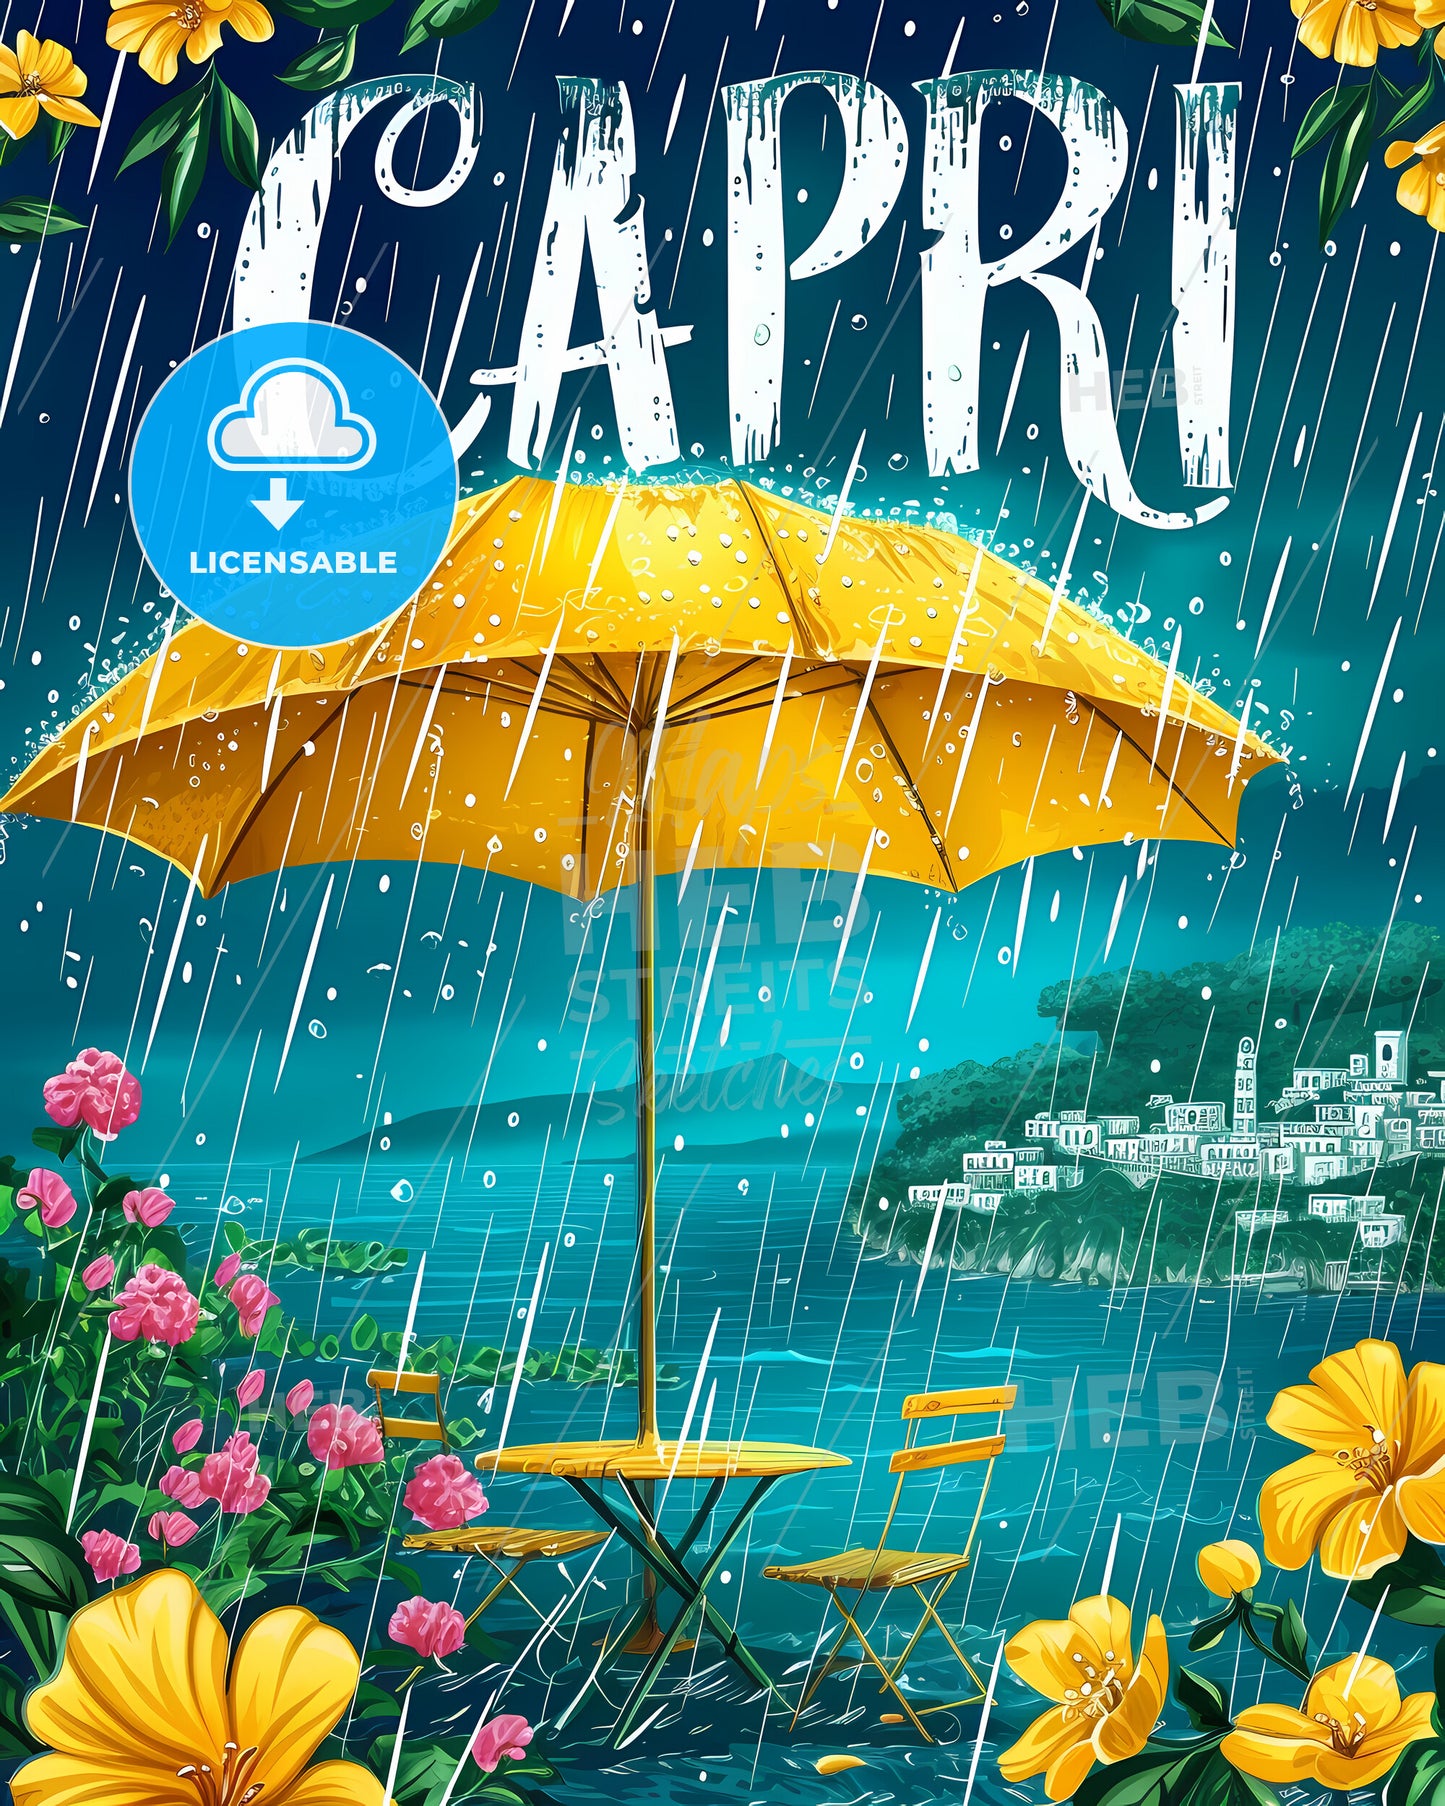 Capri Italy Poster With Text Capri In Bodony Font - A Poster Of A Rainy Day